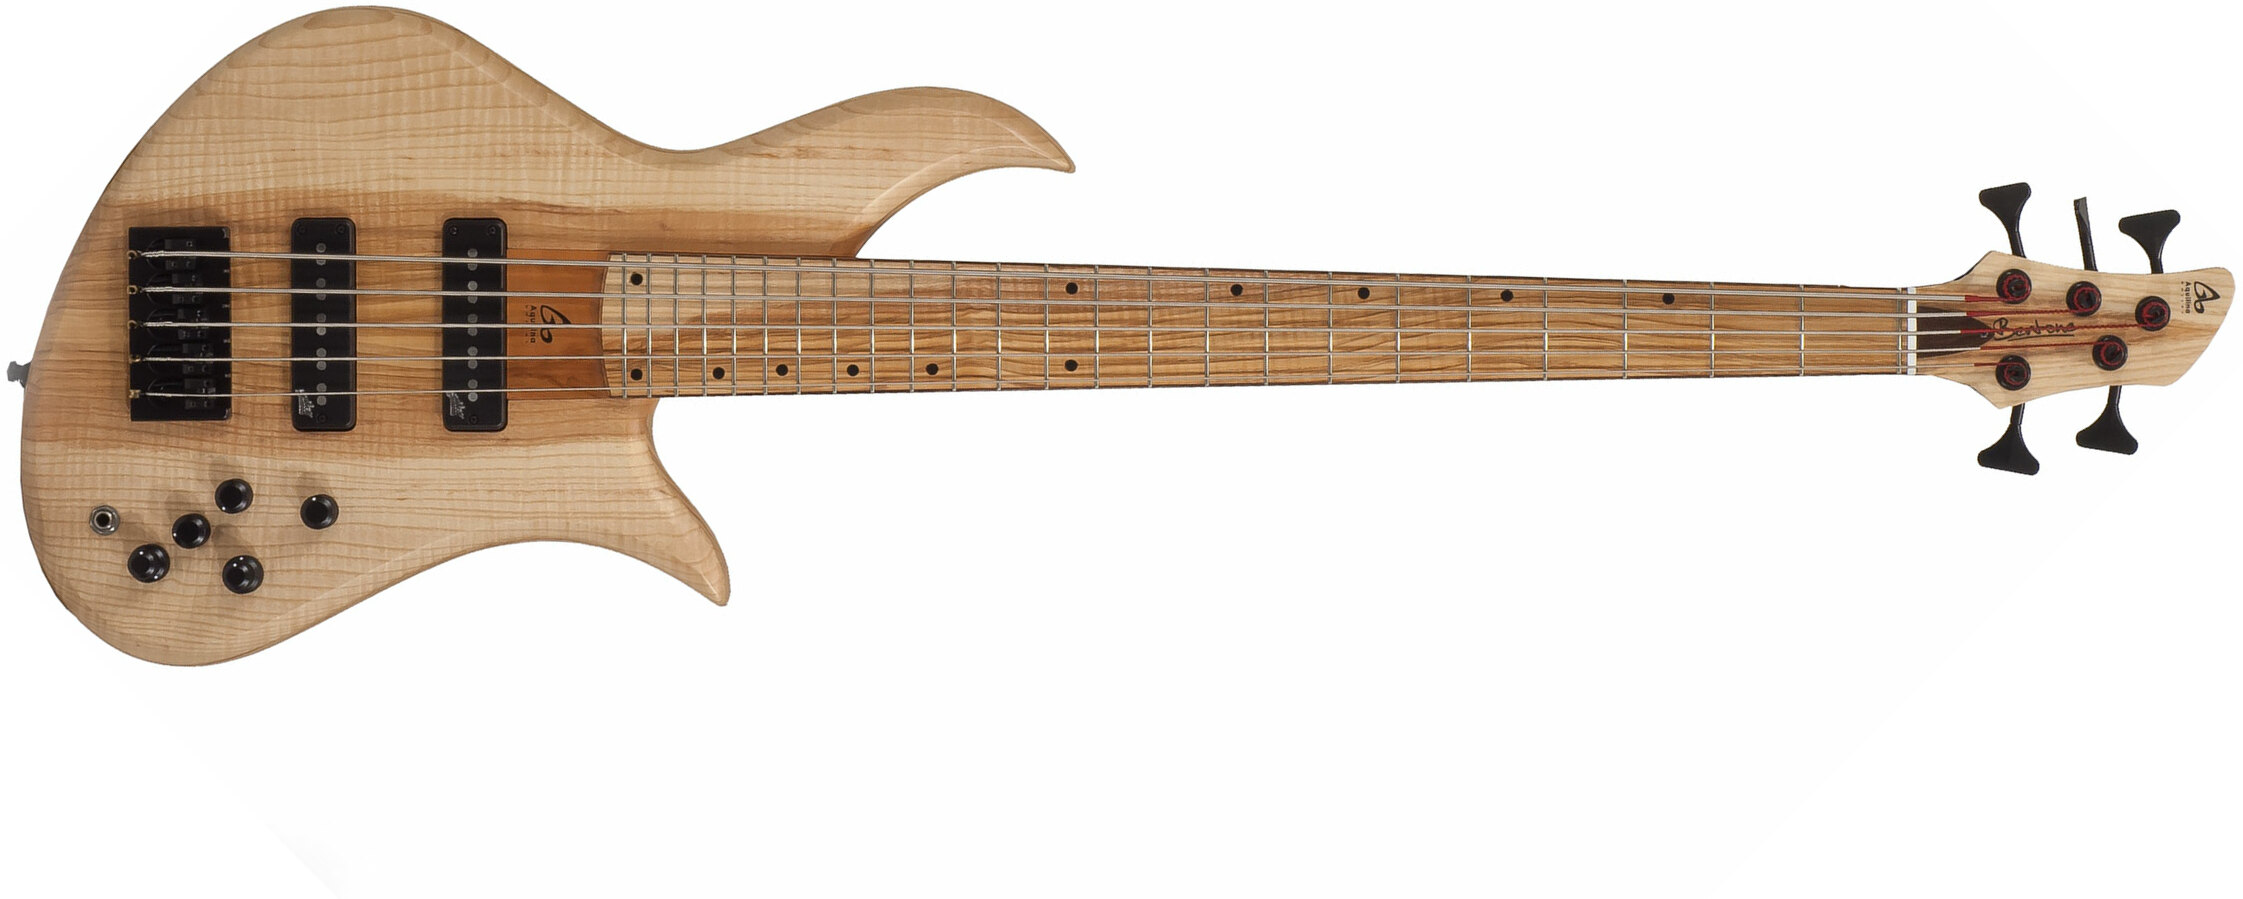 Aquilina Bertone 5 Custom Aulne/frene Active J.east Fre #021830 - Natural - Solid body electric bass - Main picture